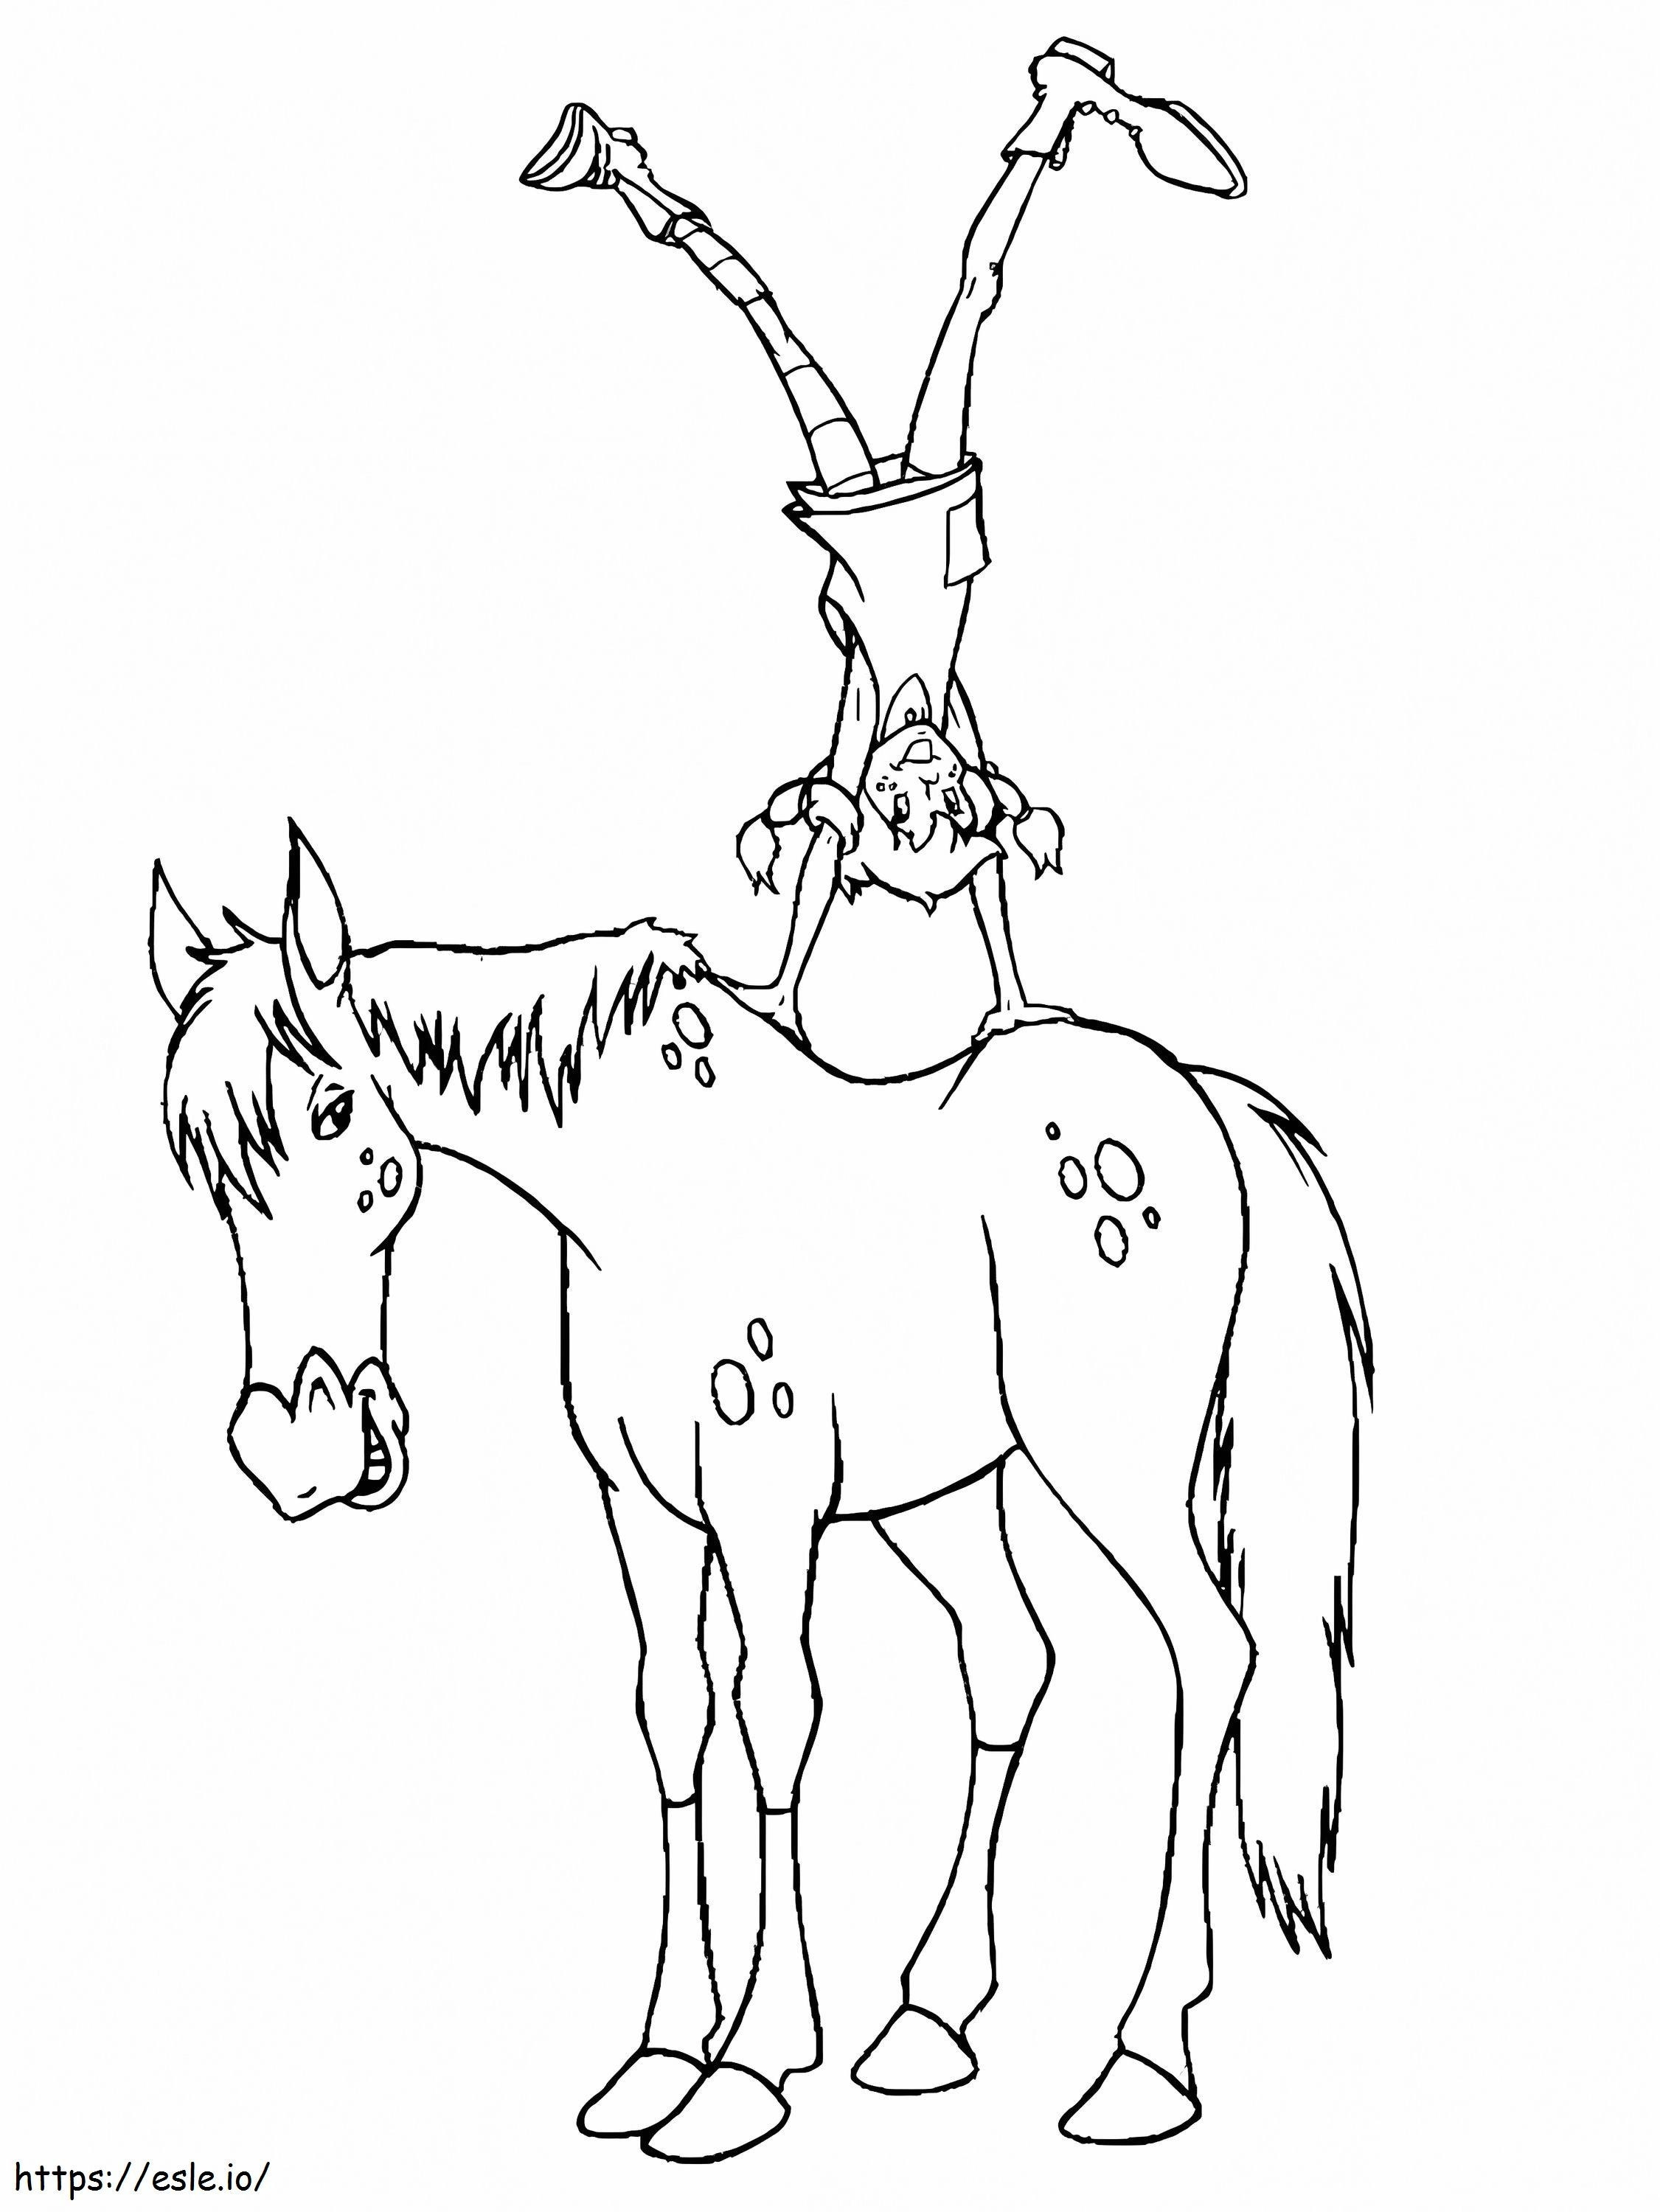 Funny Pippi Longstocking coloring page